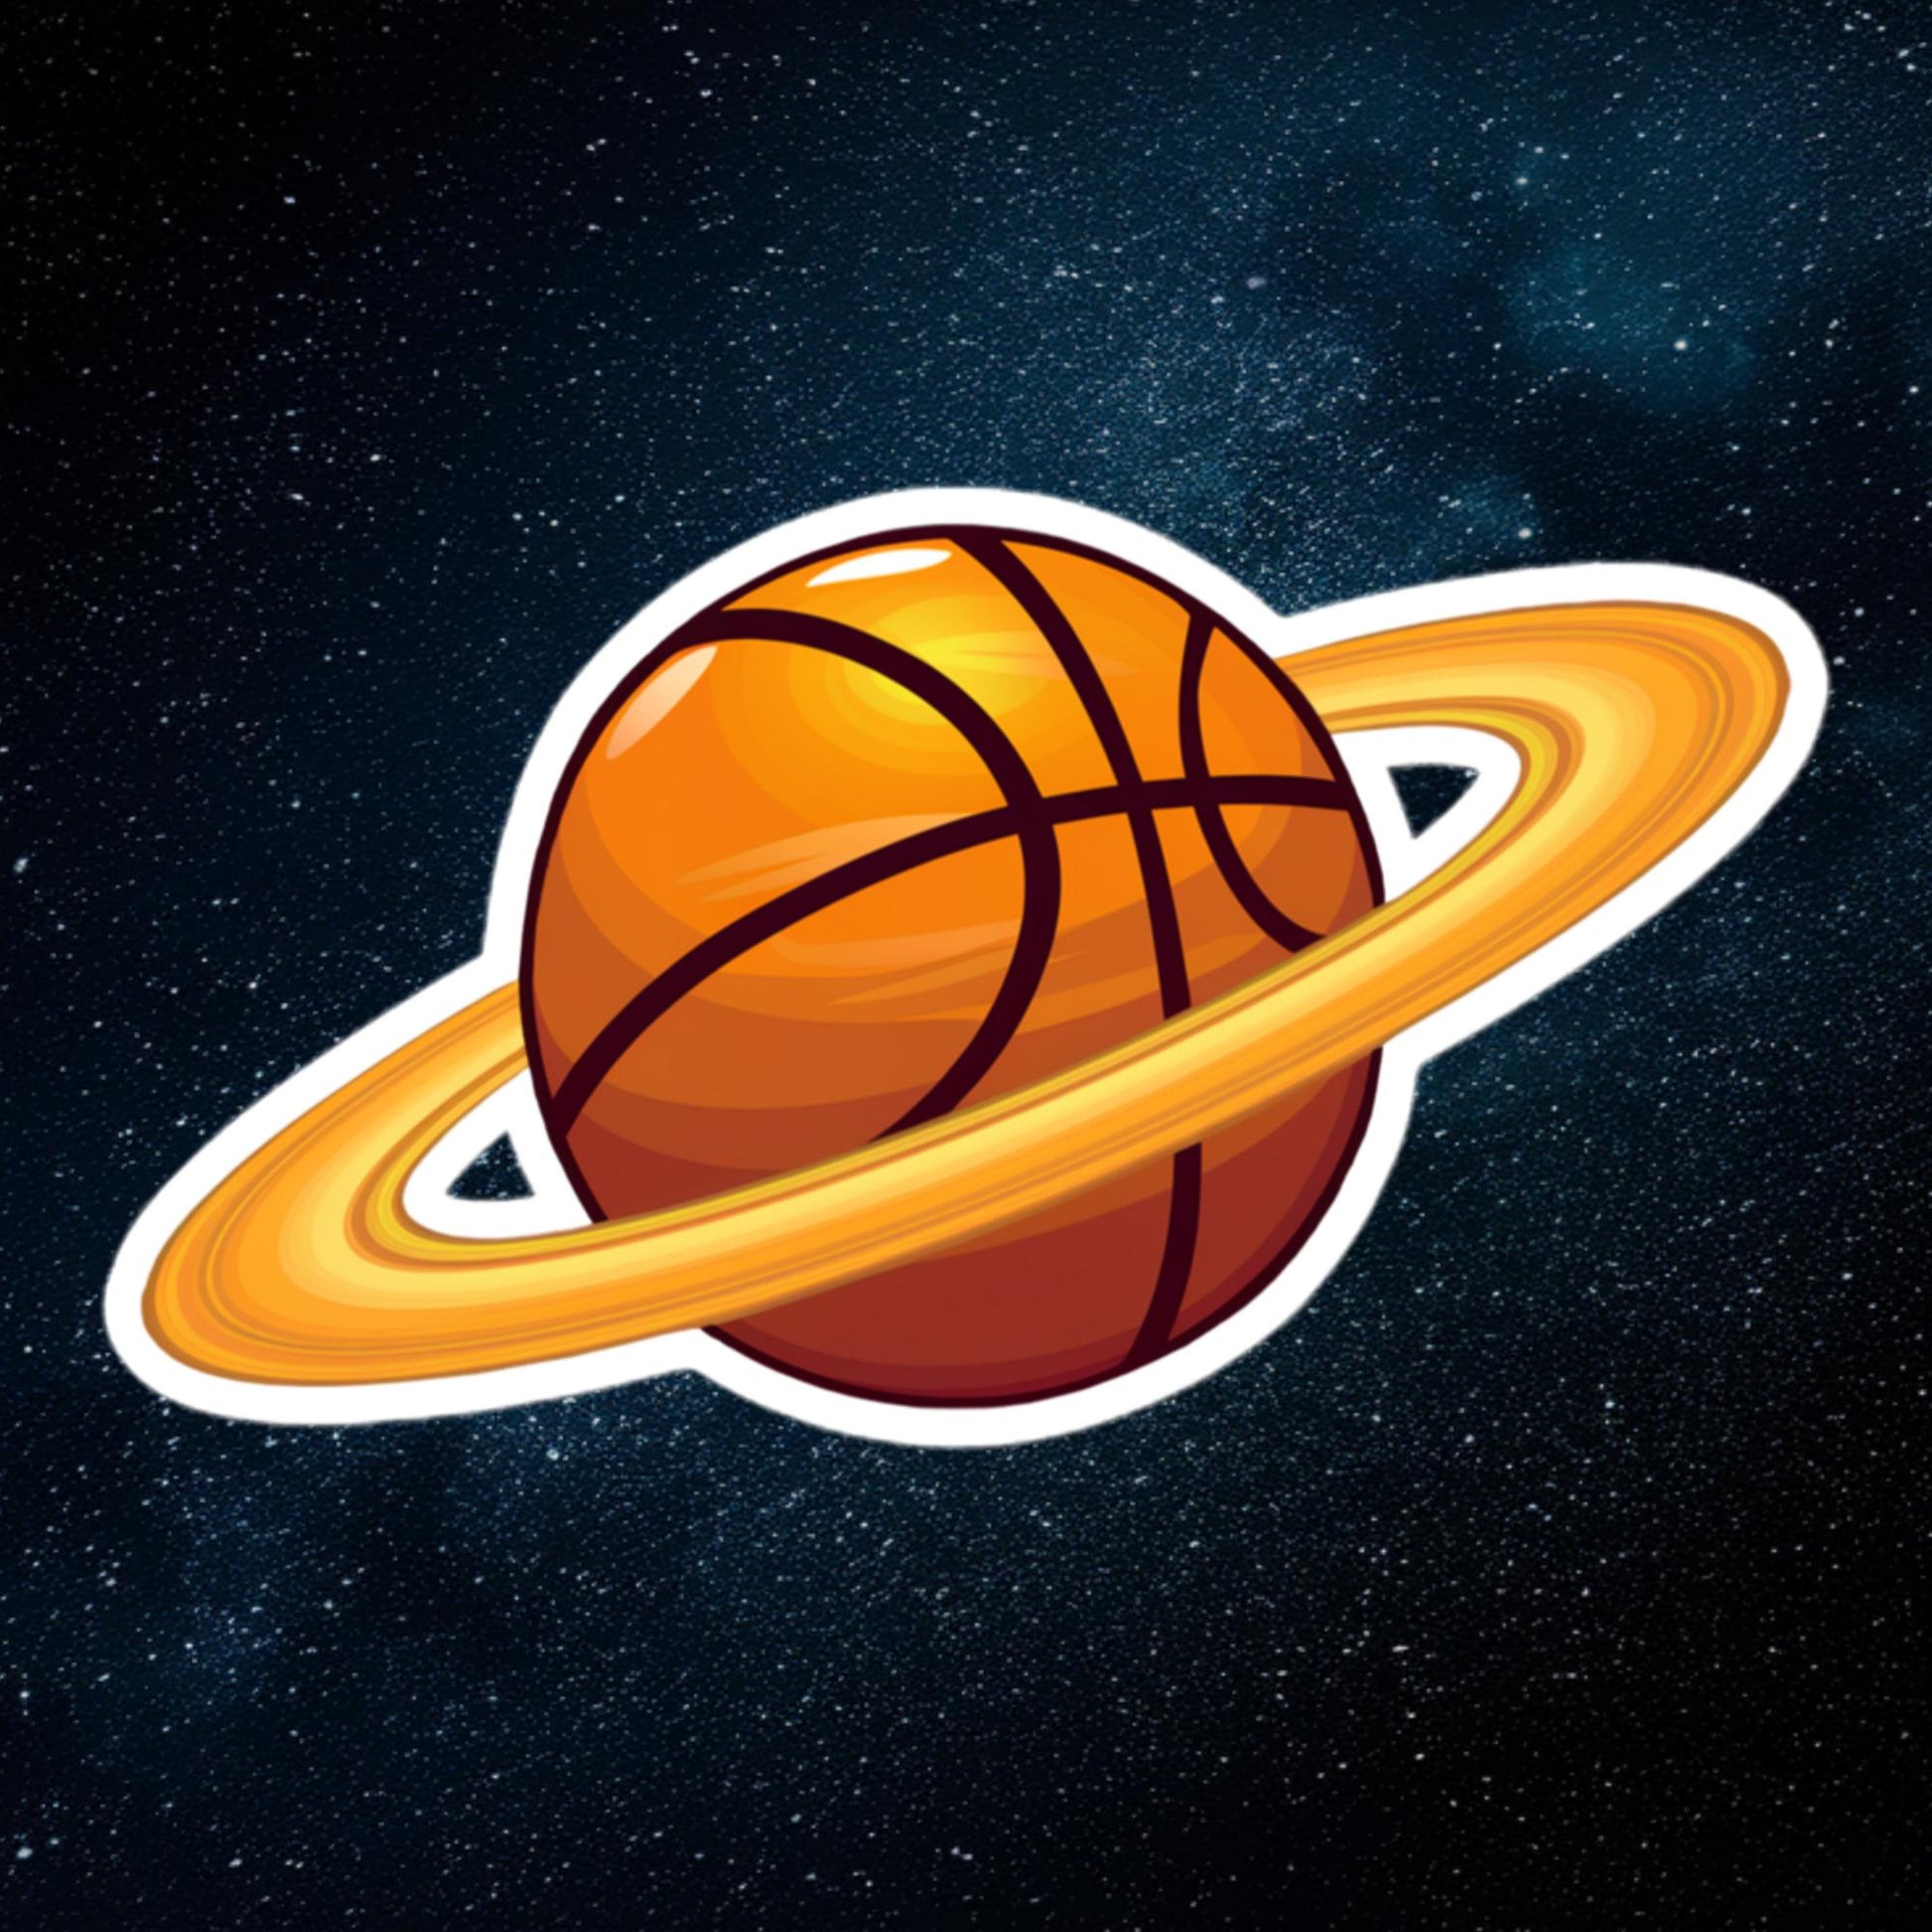 Basketball Planet Ball is Life Bubble-free stickers Next Cult Brand